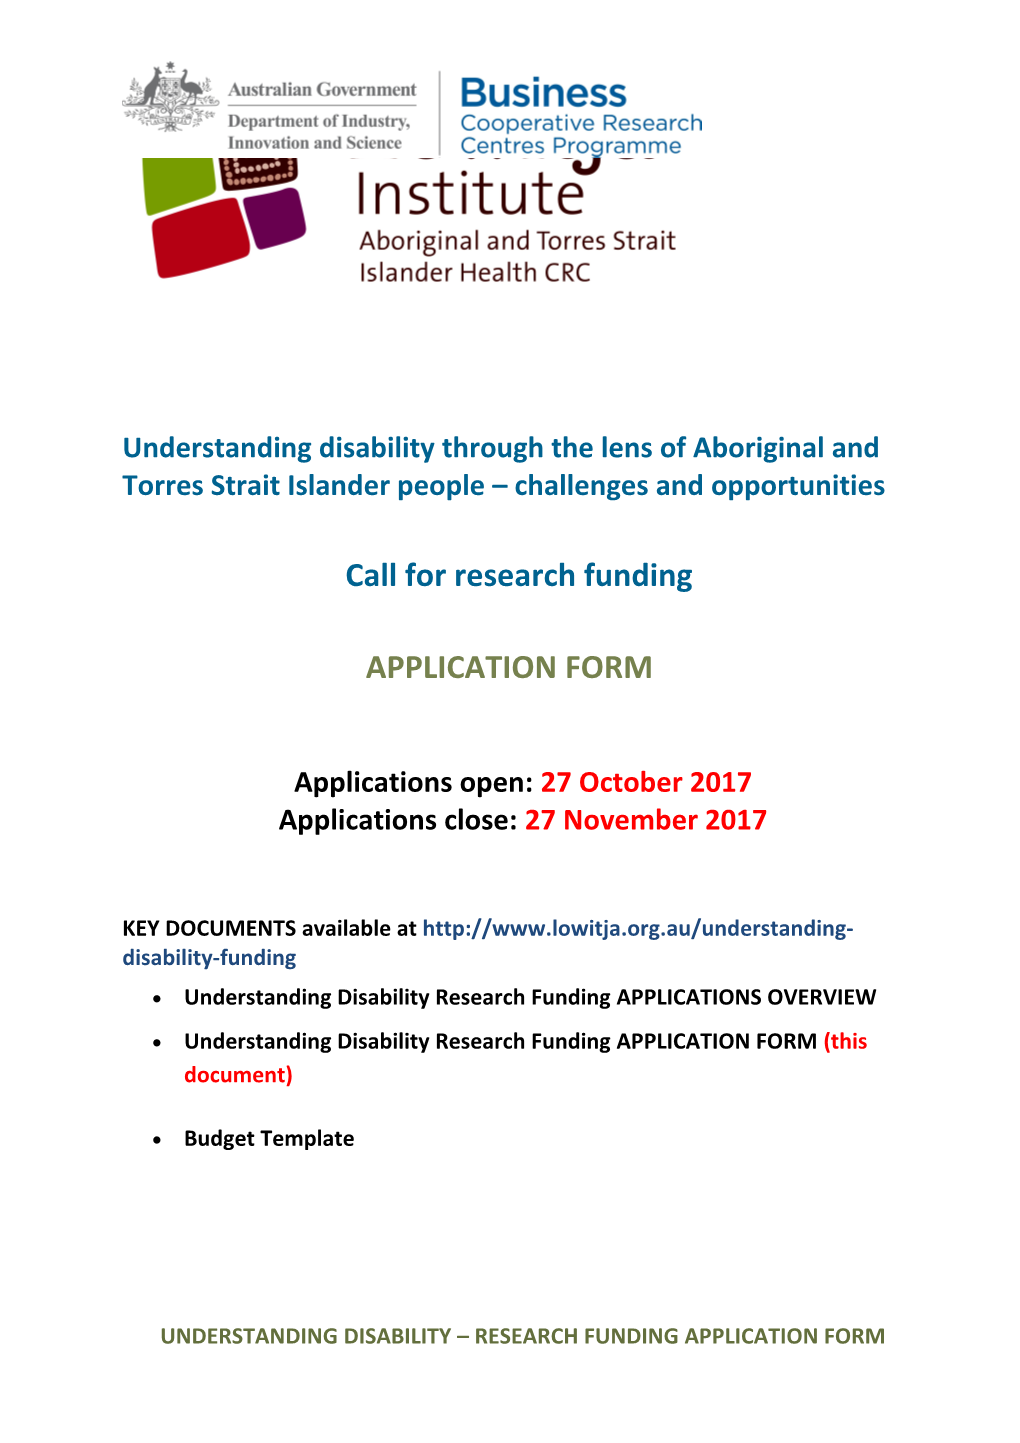 Call for Research Funding